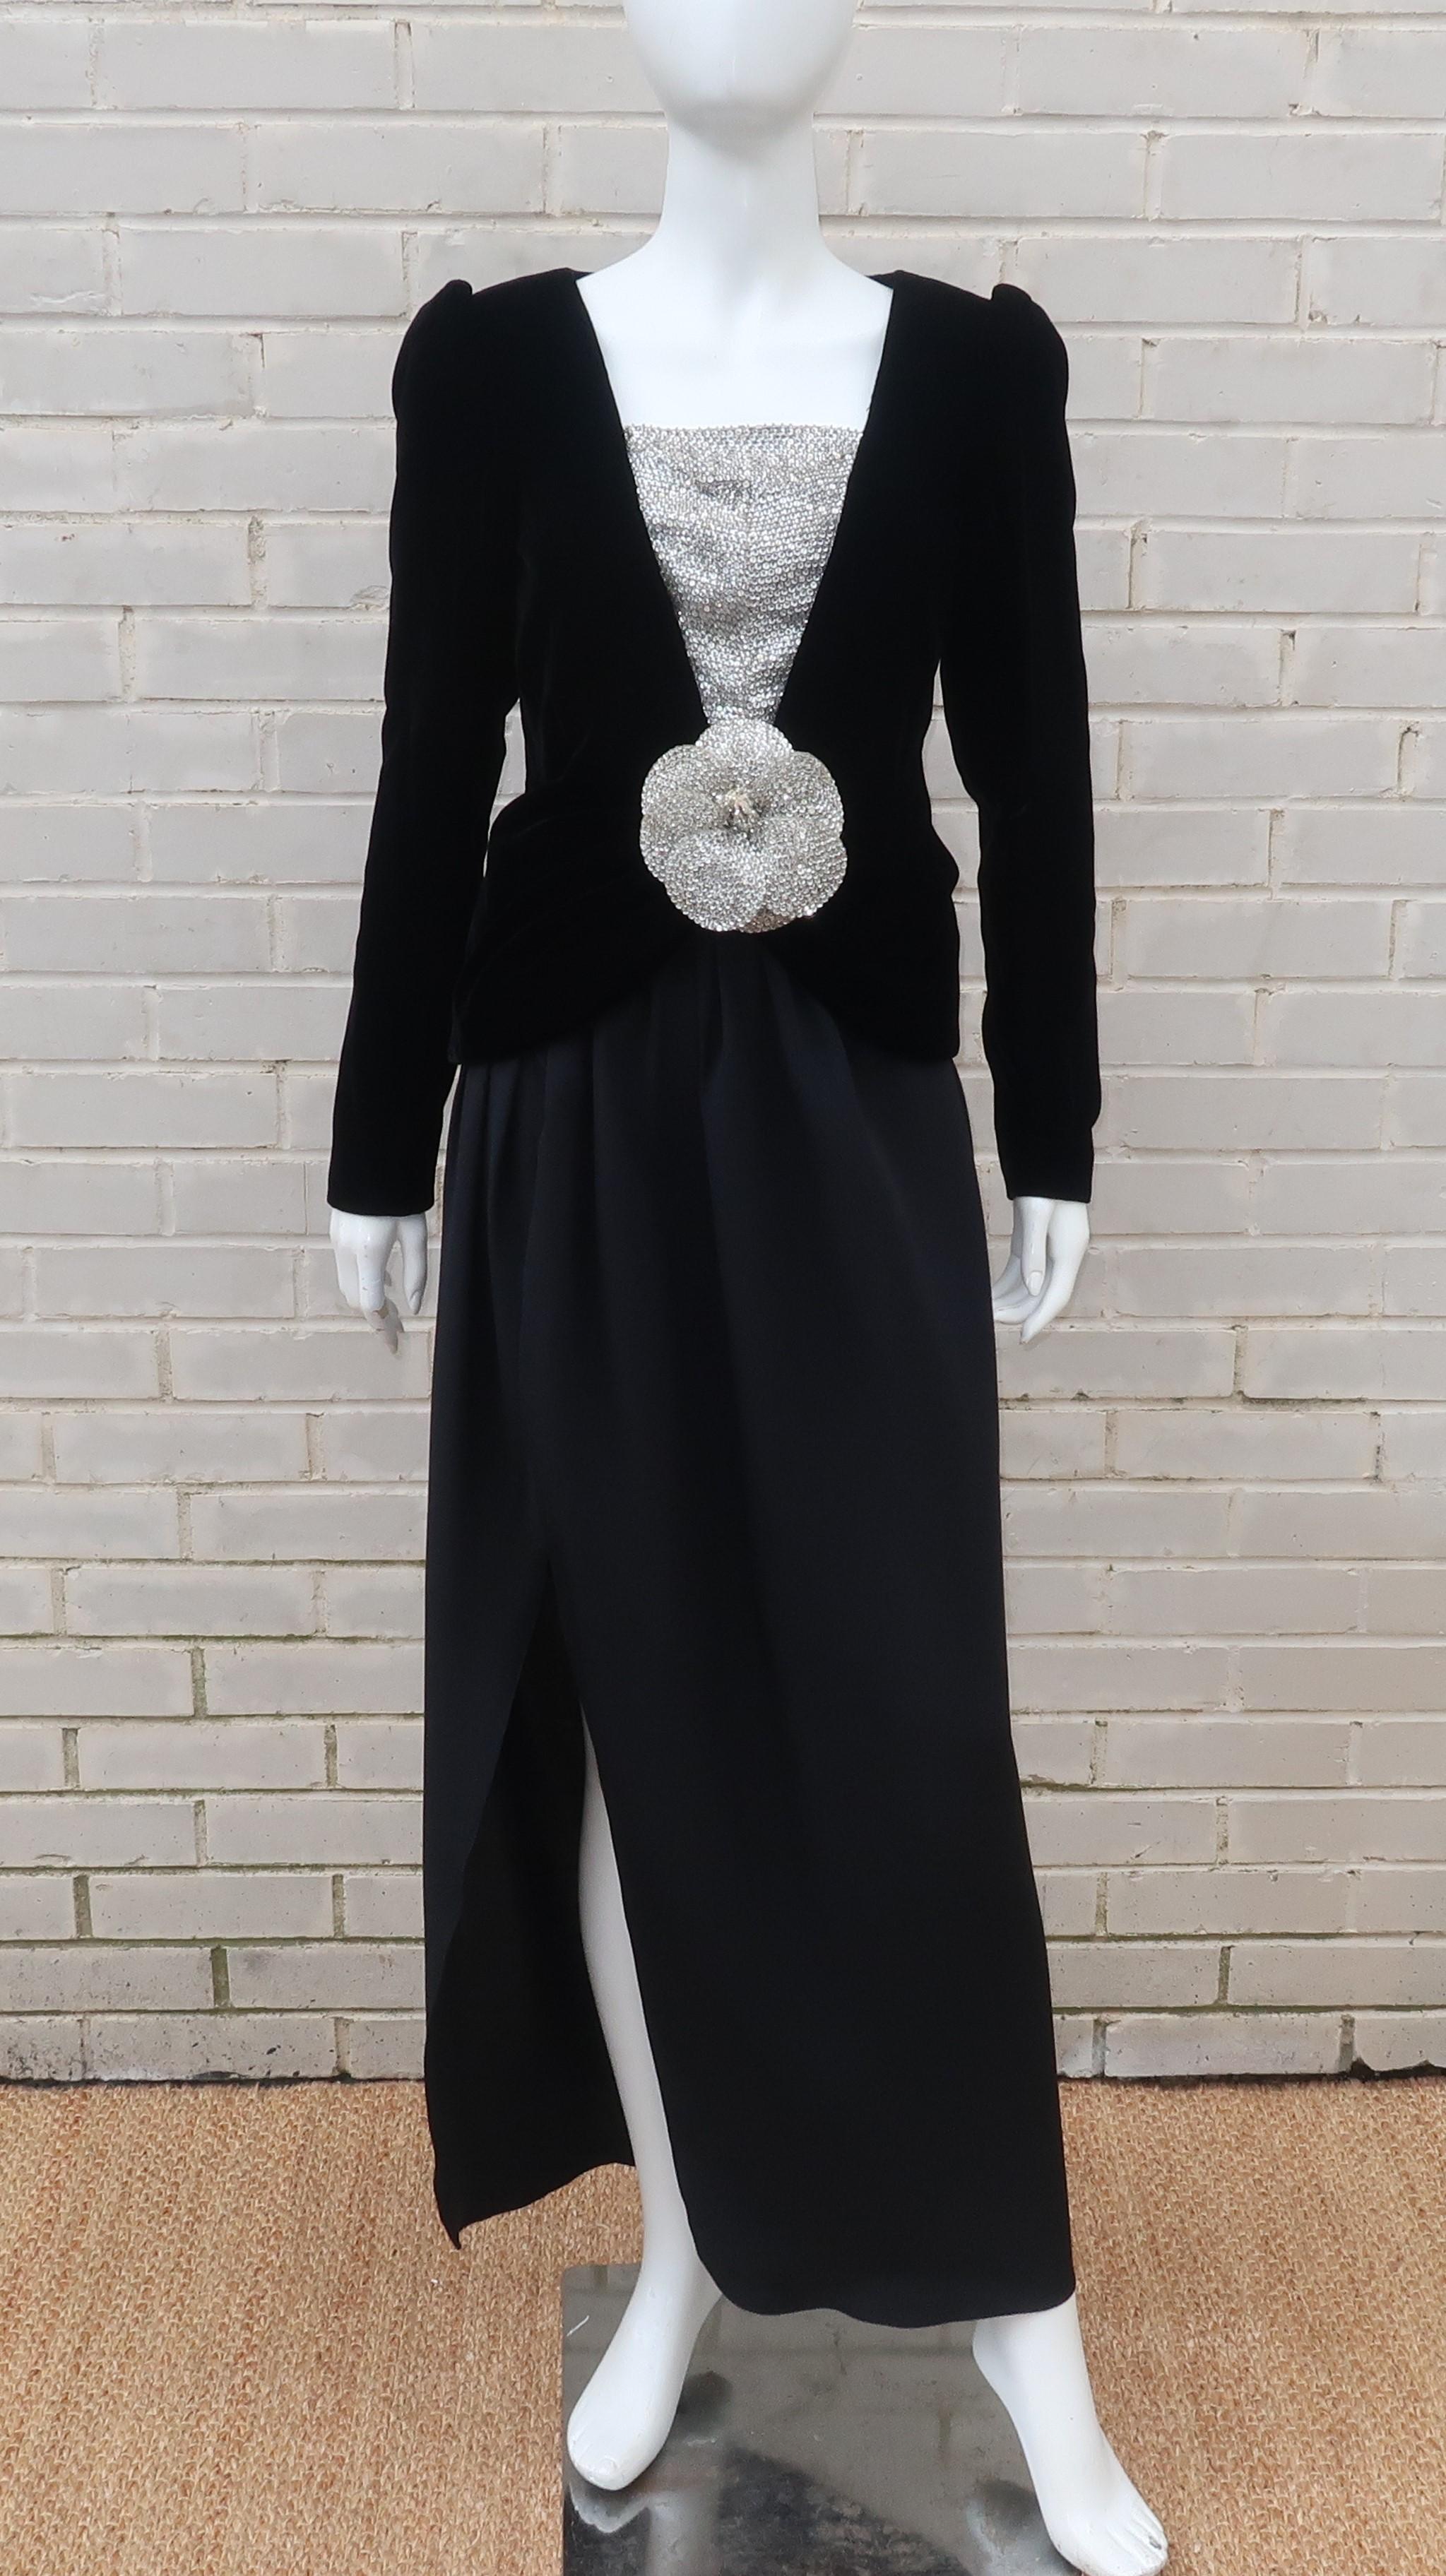 Oh the luxury and opulence of a evening ensemble by the master of feminine designs, Oscar de la Renta!  This two piece outfit consists of a long black silk skirt topped with a black velvet jacket adorned with a silver sequin 'bib' and a detachable